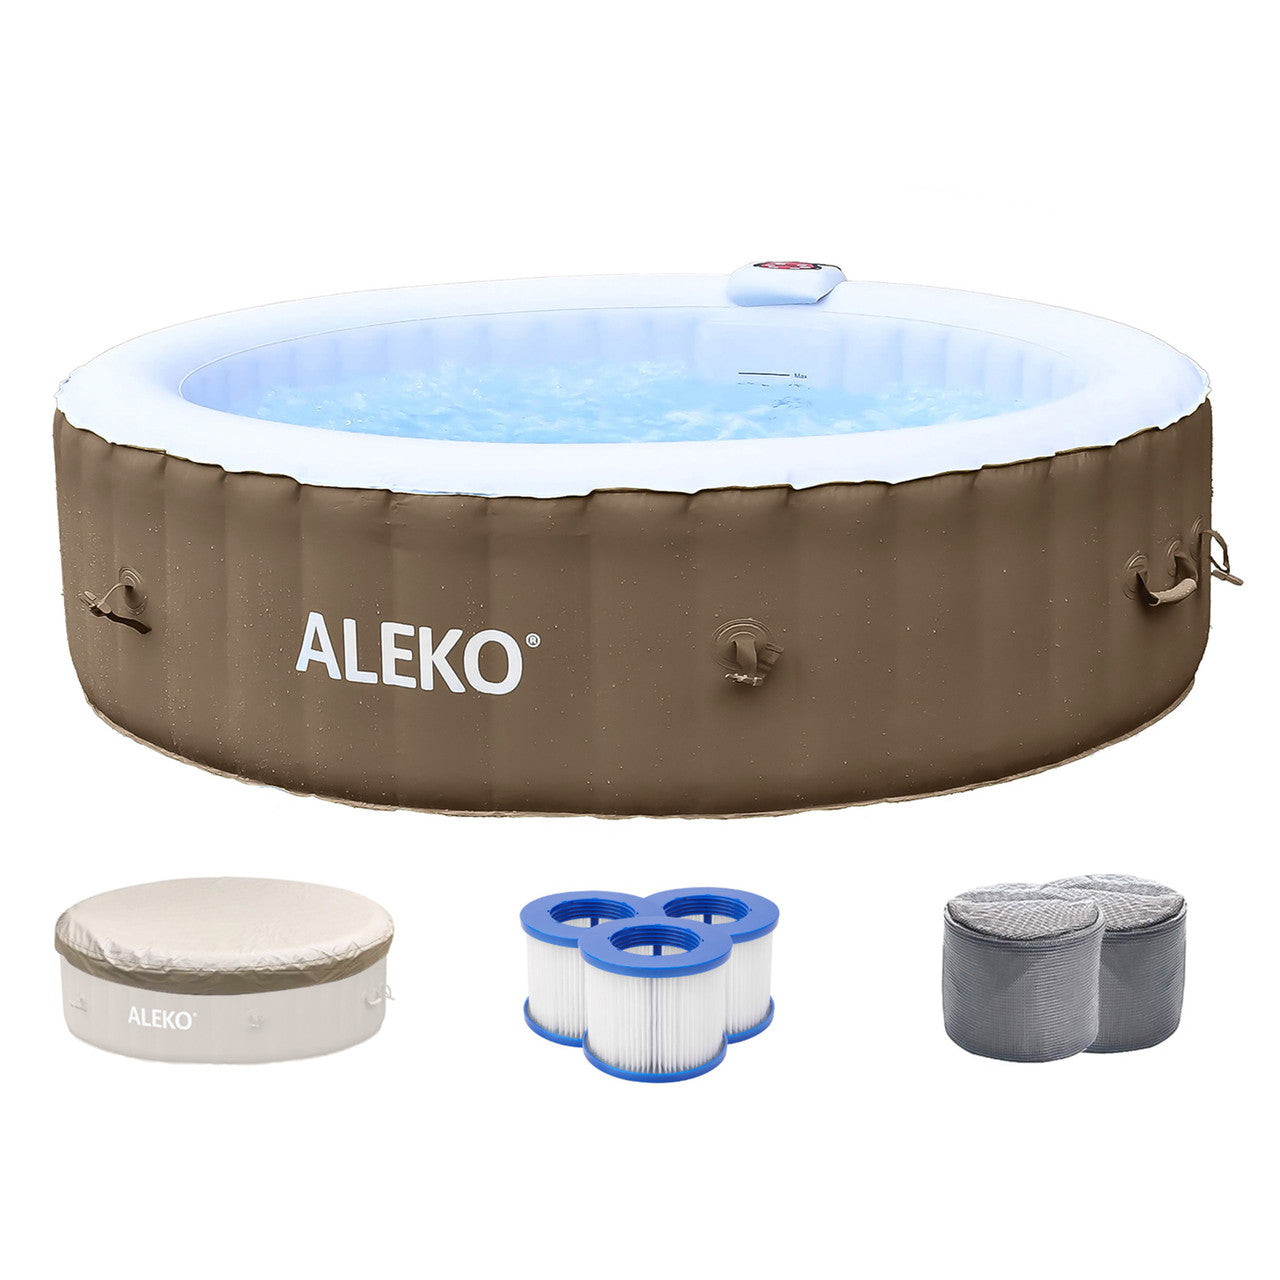 Aleko Round Inflatable Jetted Hot Tub with Cover - 6 Person - 265 Gallon - Brown HTIR6GYBR-AP - Serenity Provision